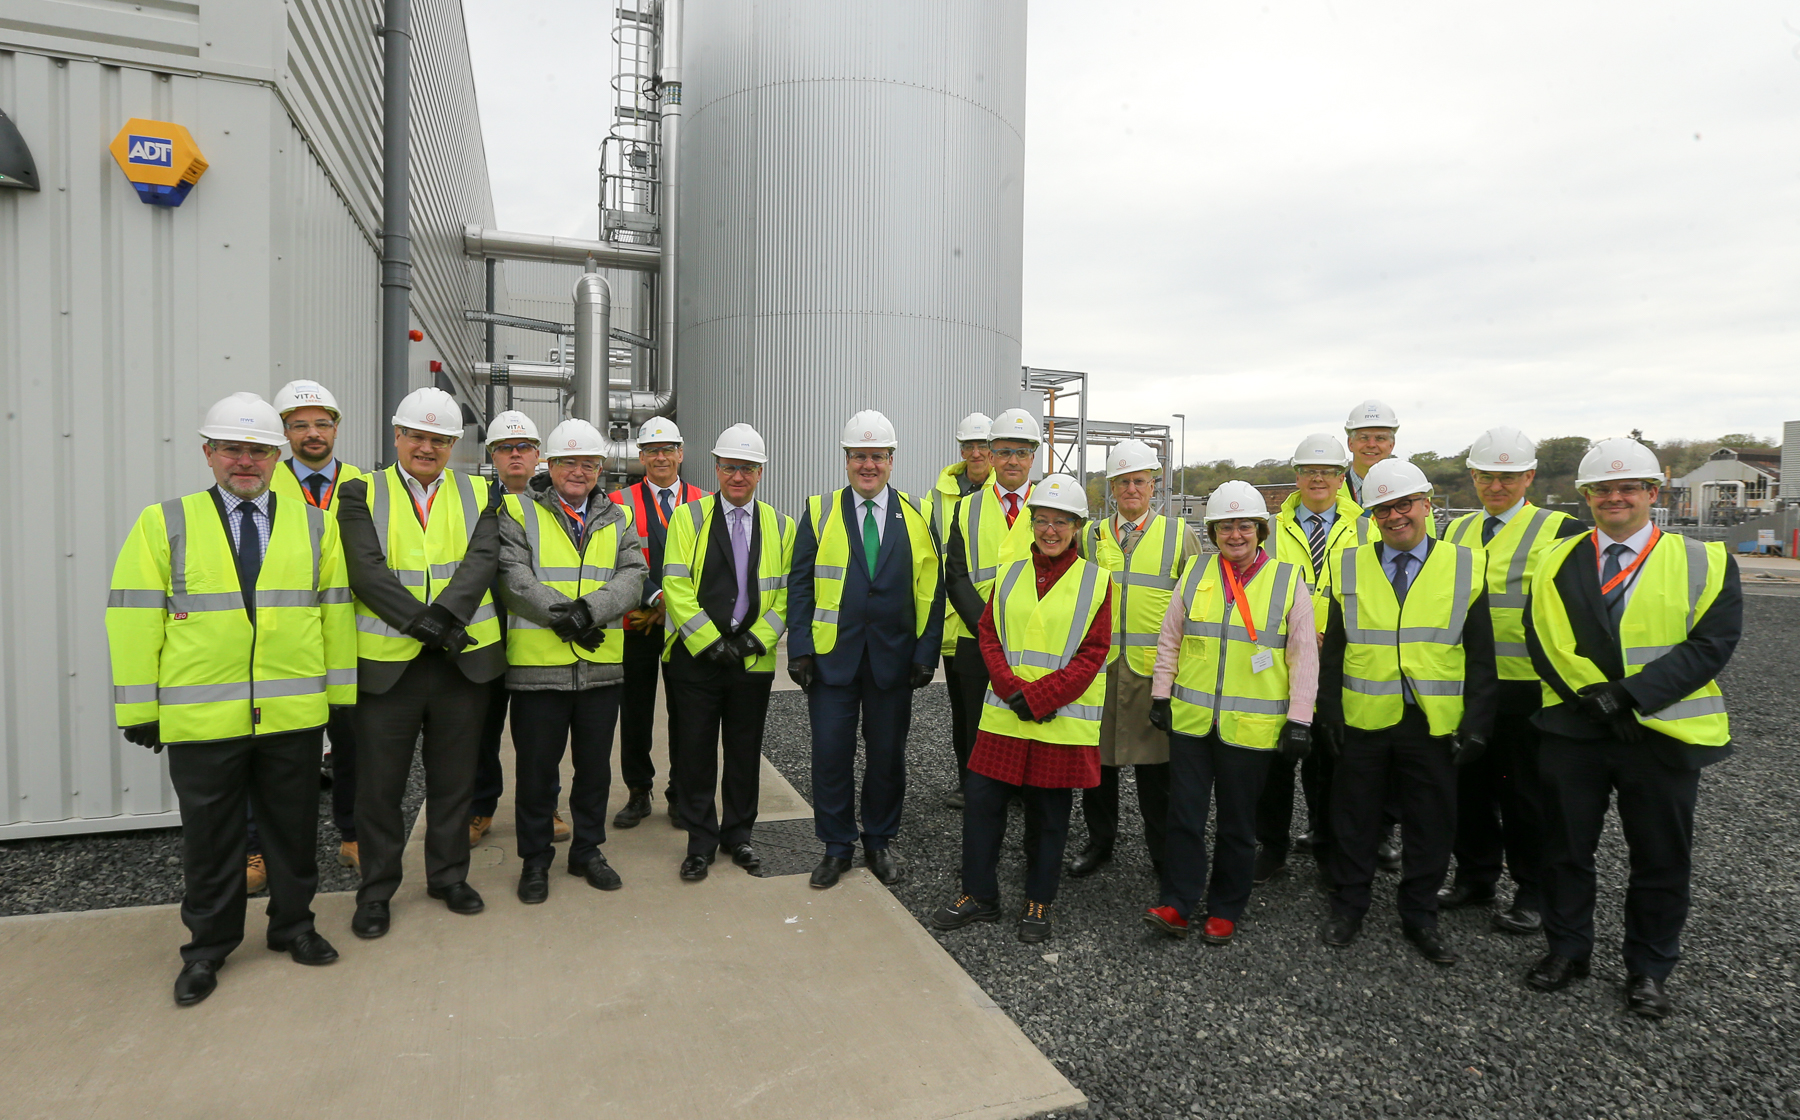 Scotland’s first 100% renewable biomass heat and power district network opens